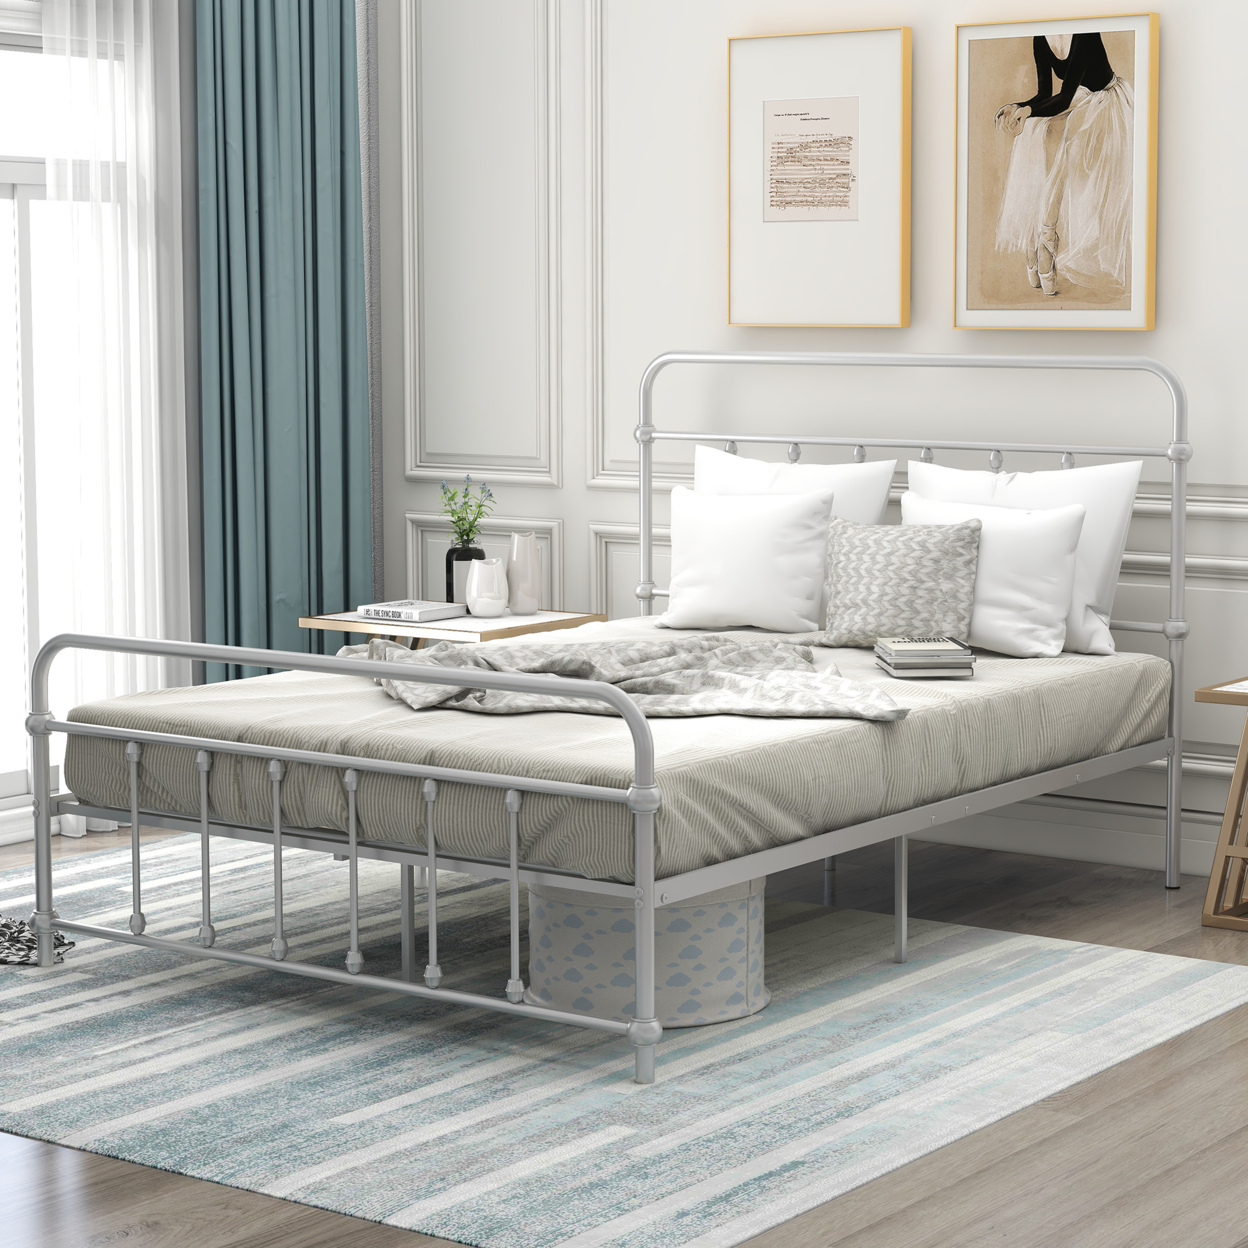 Full Size Metal Platform Bed with Headboard and Footboard, Iron Bed Frame for Bedroom, No Box Spring Needed ï¿½ï¿½Silver